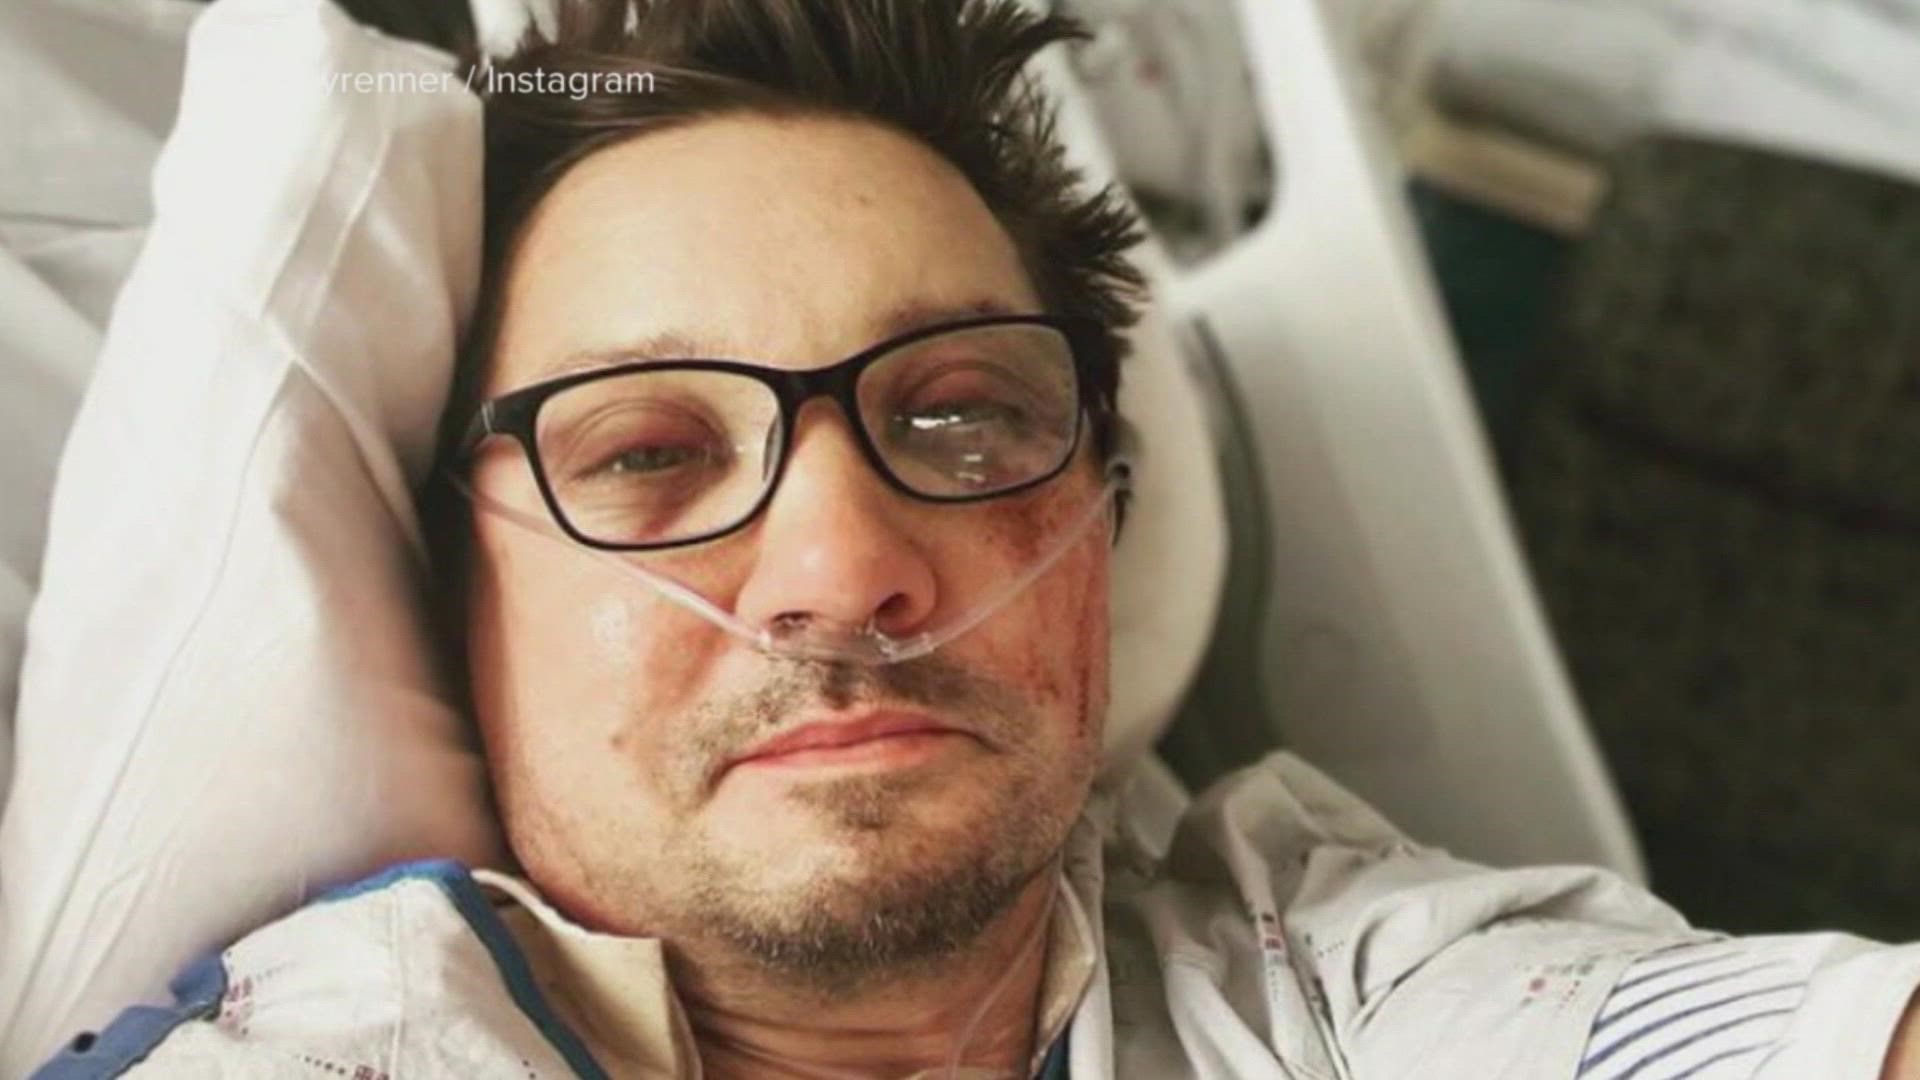 Renner spent more than two weeks in the hospital after being run over by his own 7-ton snowcat.